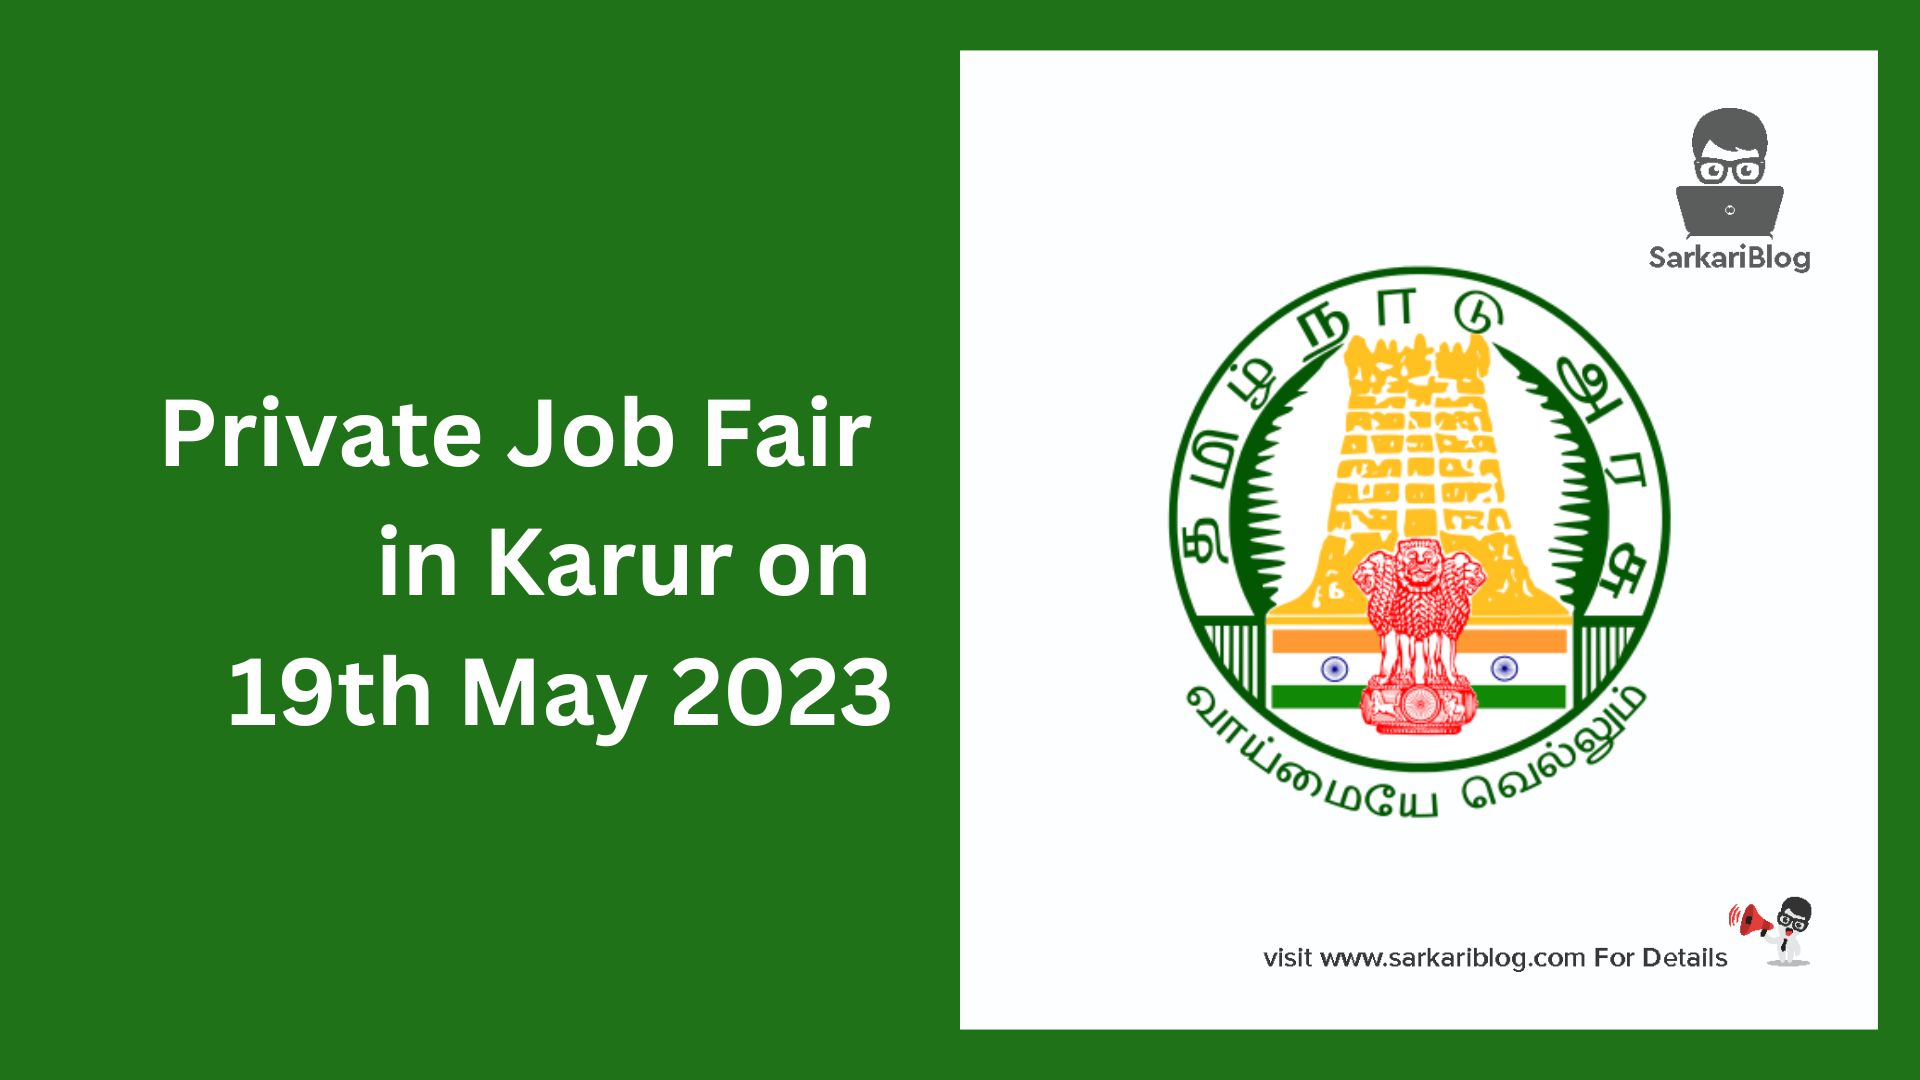 Private Job Fair in Karur on 19th May 2023